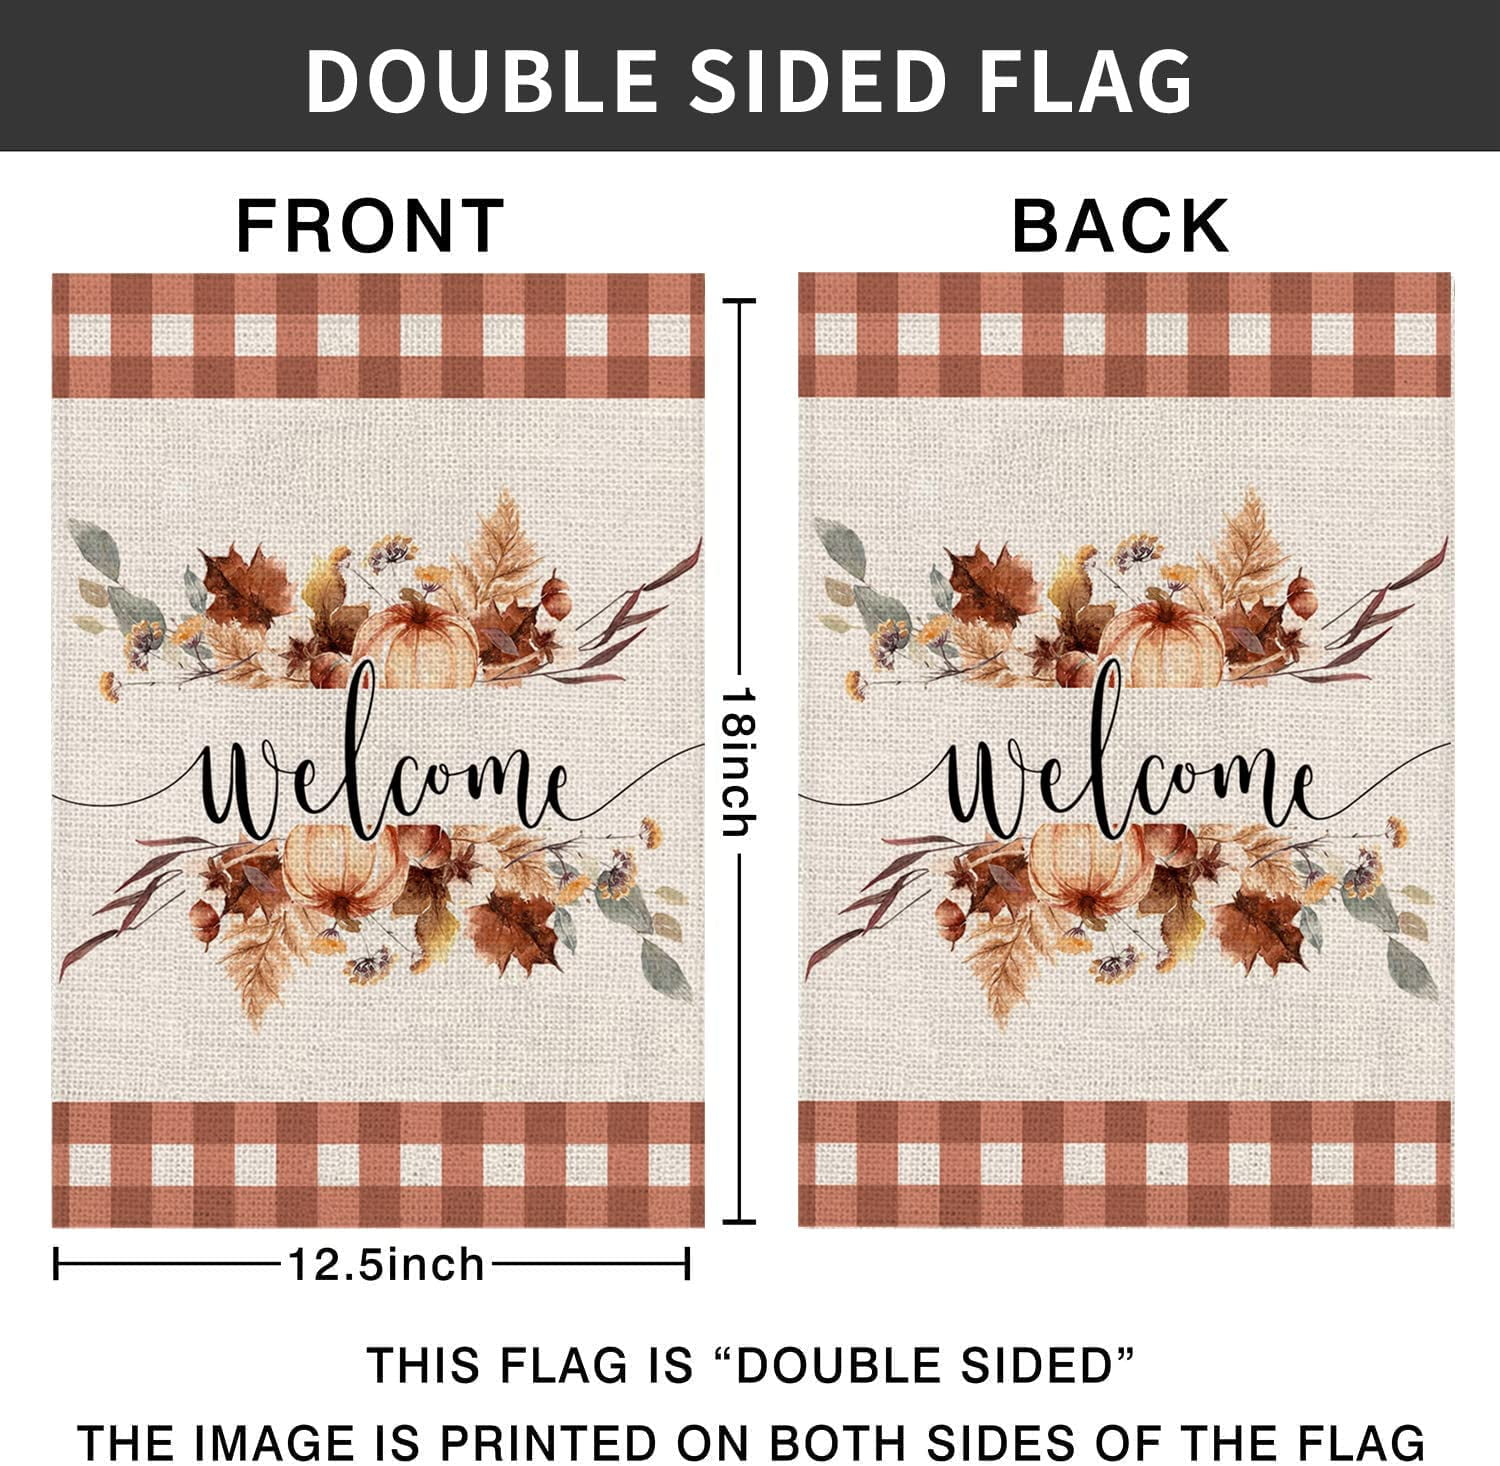 Fupoqi Maelys Happy Father's Day Garden Flag 12x18 Double Sided Burlap  Buffalo Check Plaid Truck Rose Floral Garden Flags Banners Vertical for  Daddy Papa Grandpa Father's Day Ou 